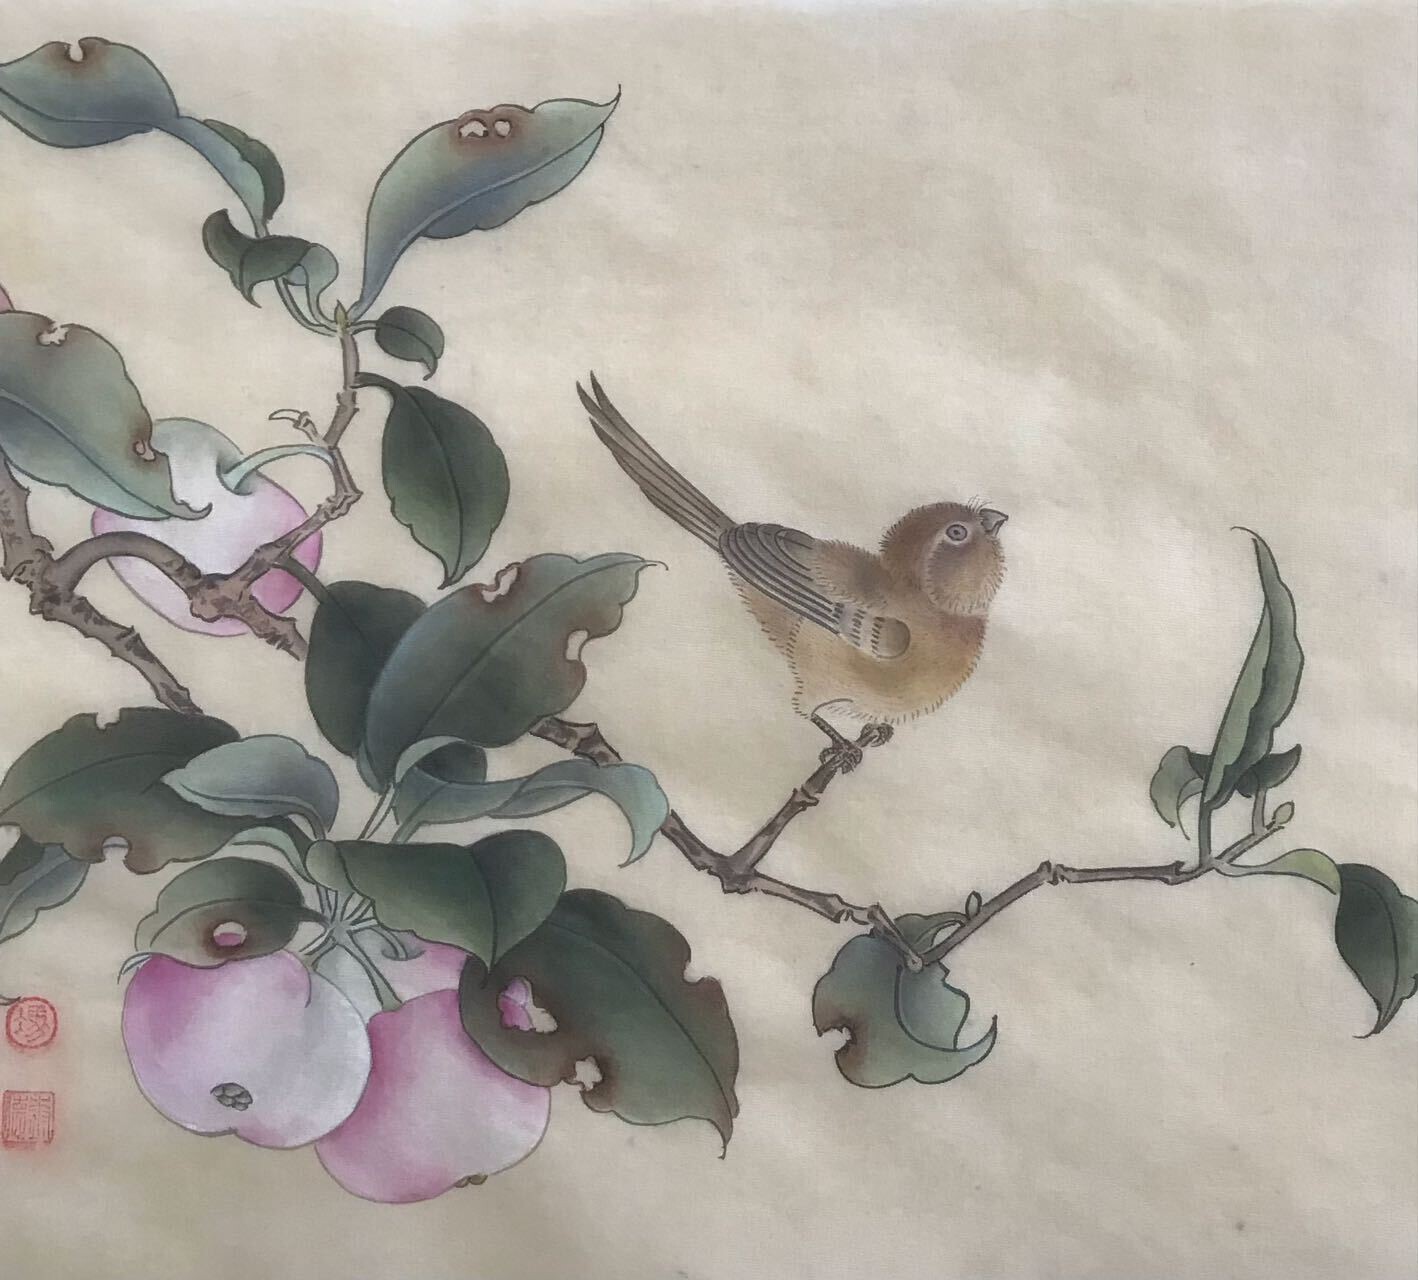 Fruits Ripe and Birds Come 果熟来禽图（仿宋画）